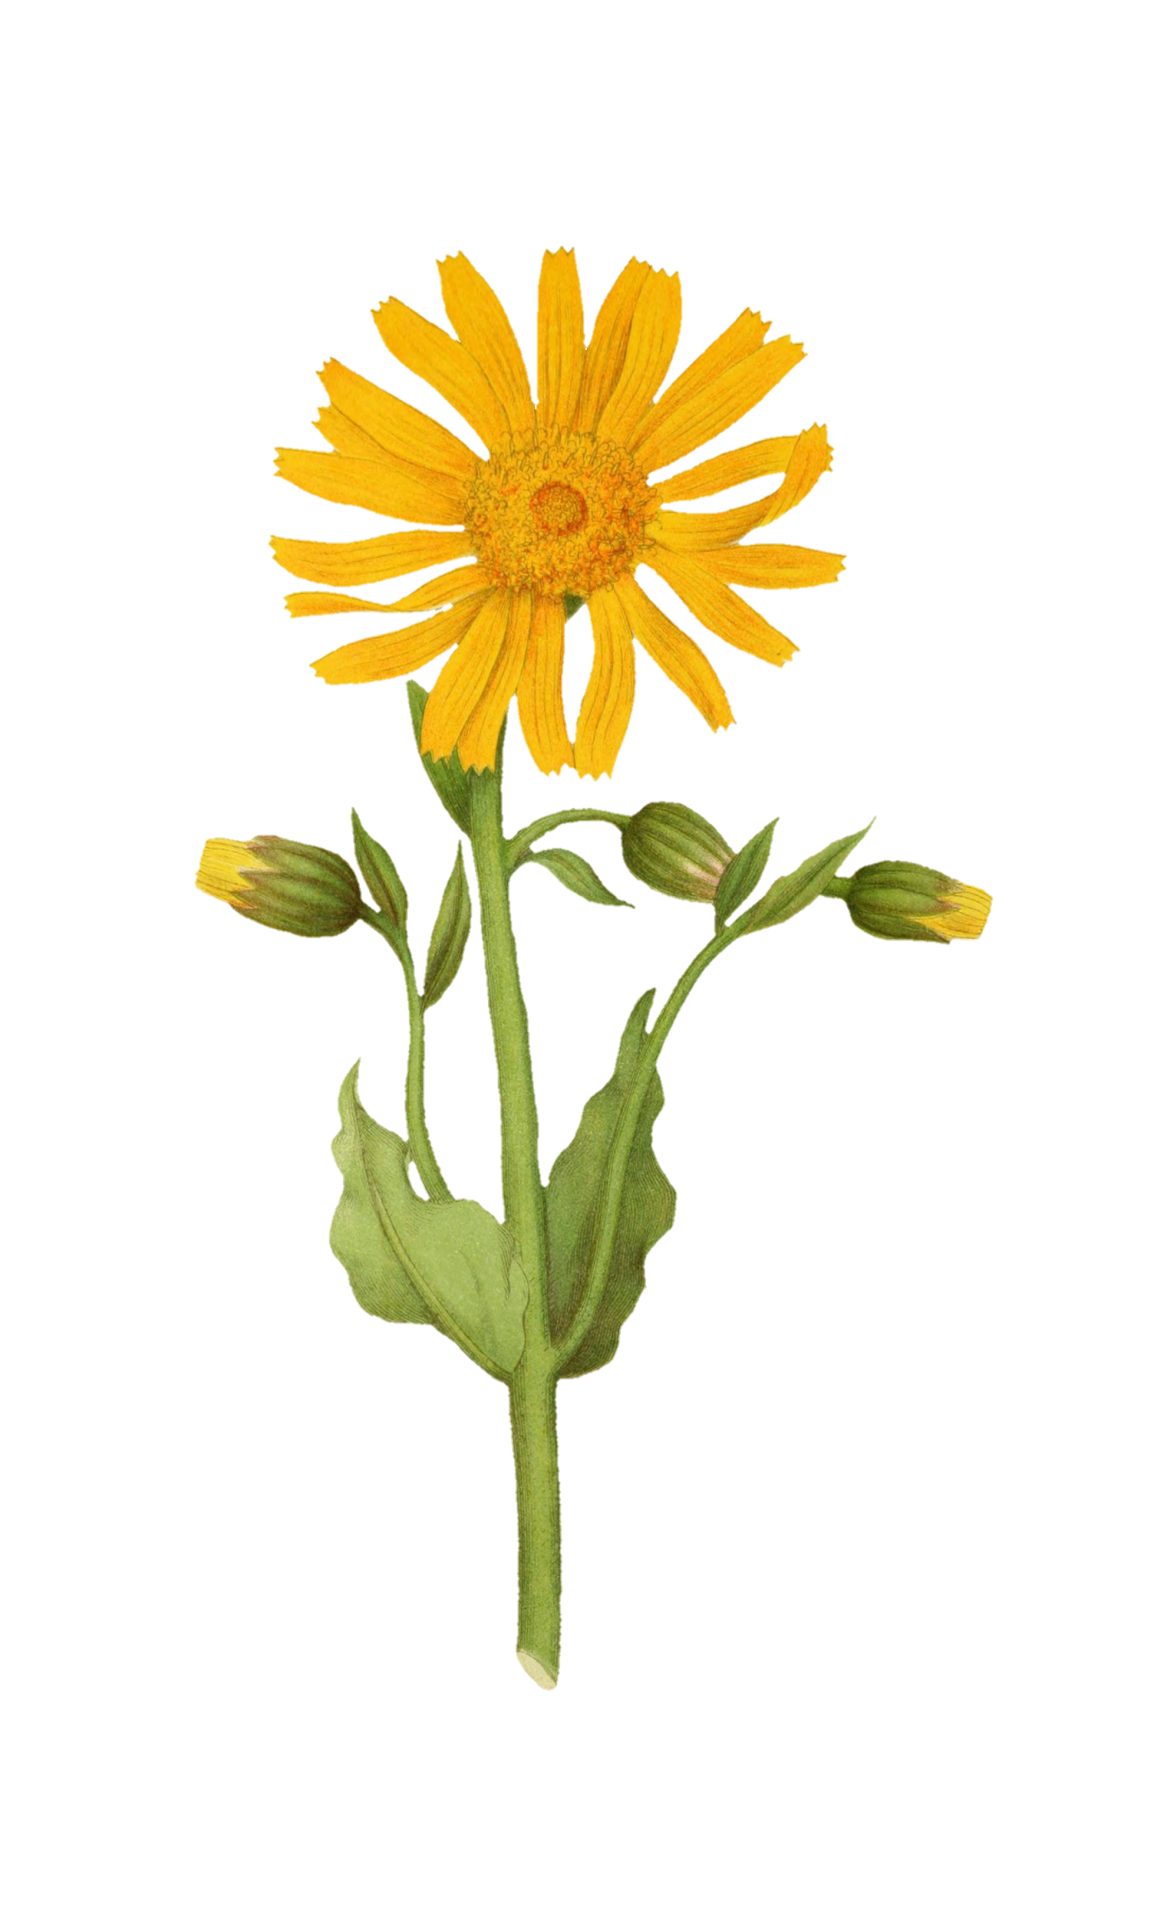 Sunflower Painted Art Clipart Free Stock Photo - Public Domain Pictures